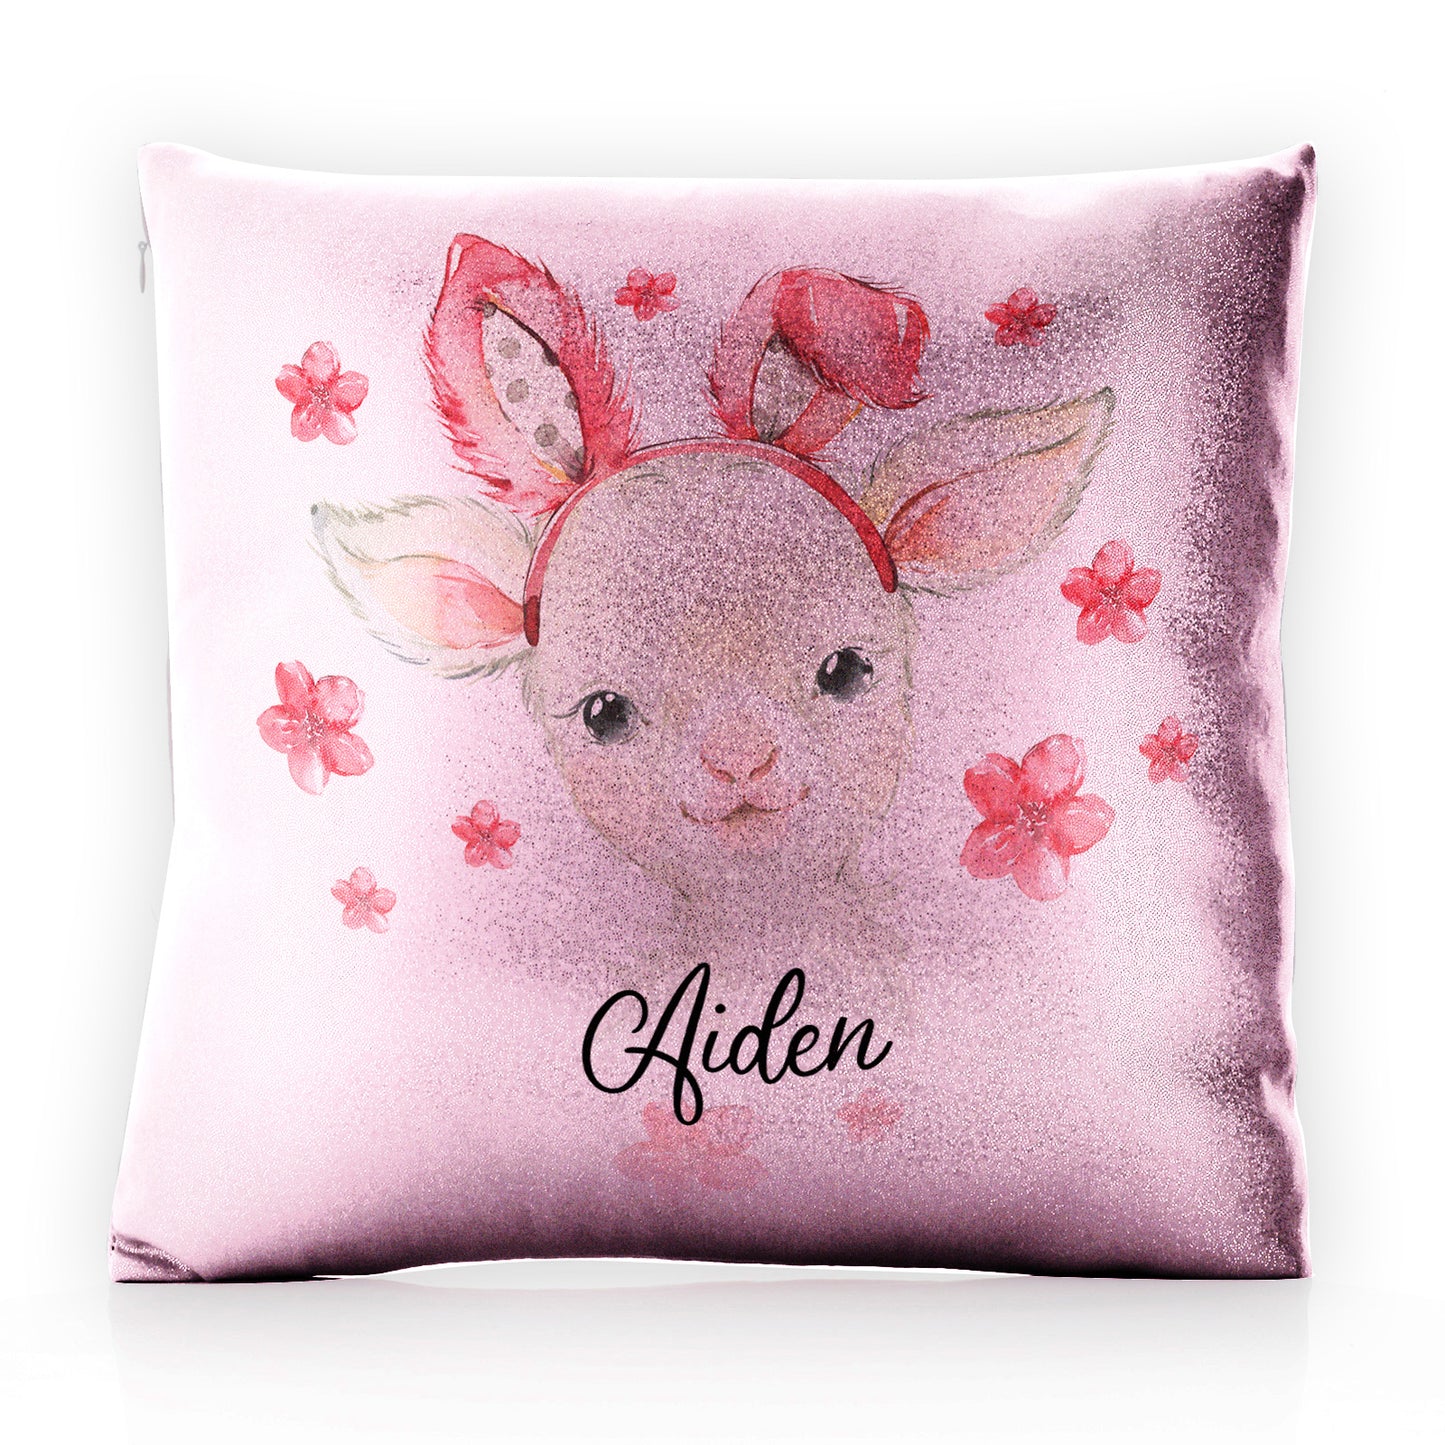 Personalised Glitter Cushion with White Lamb Pink Bunny Ears and Flowers and Cute Text